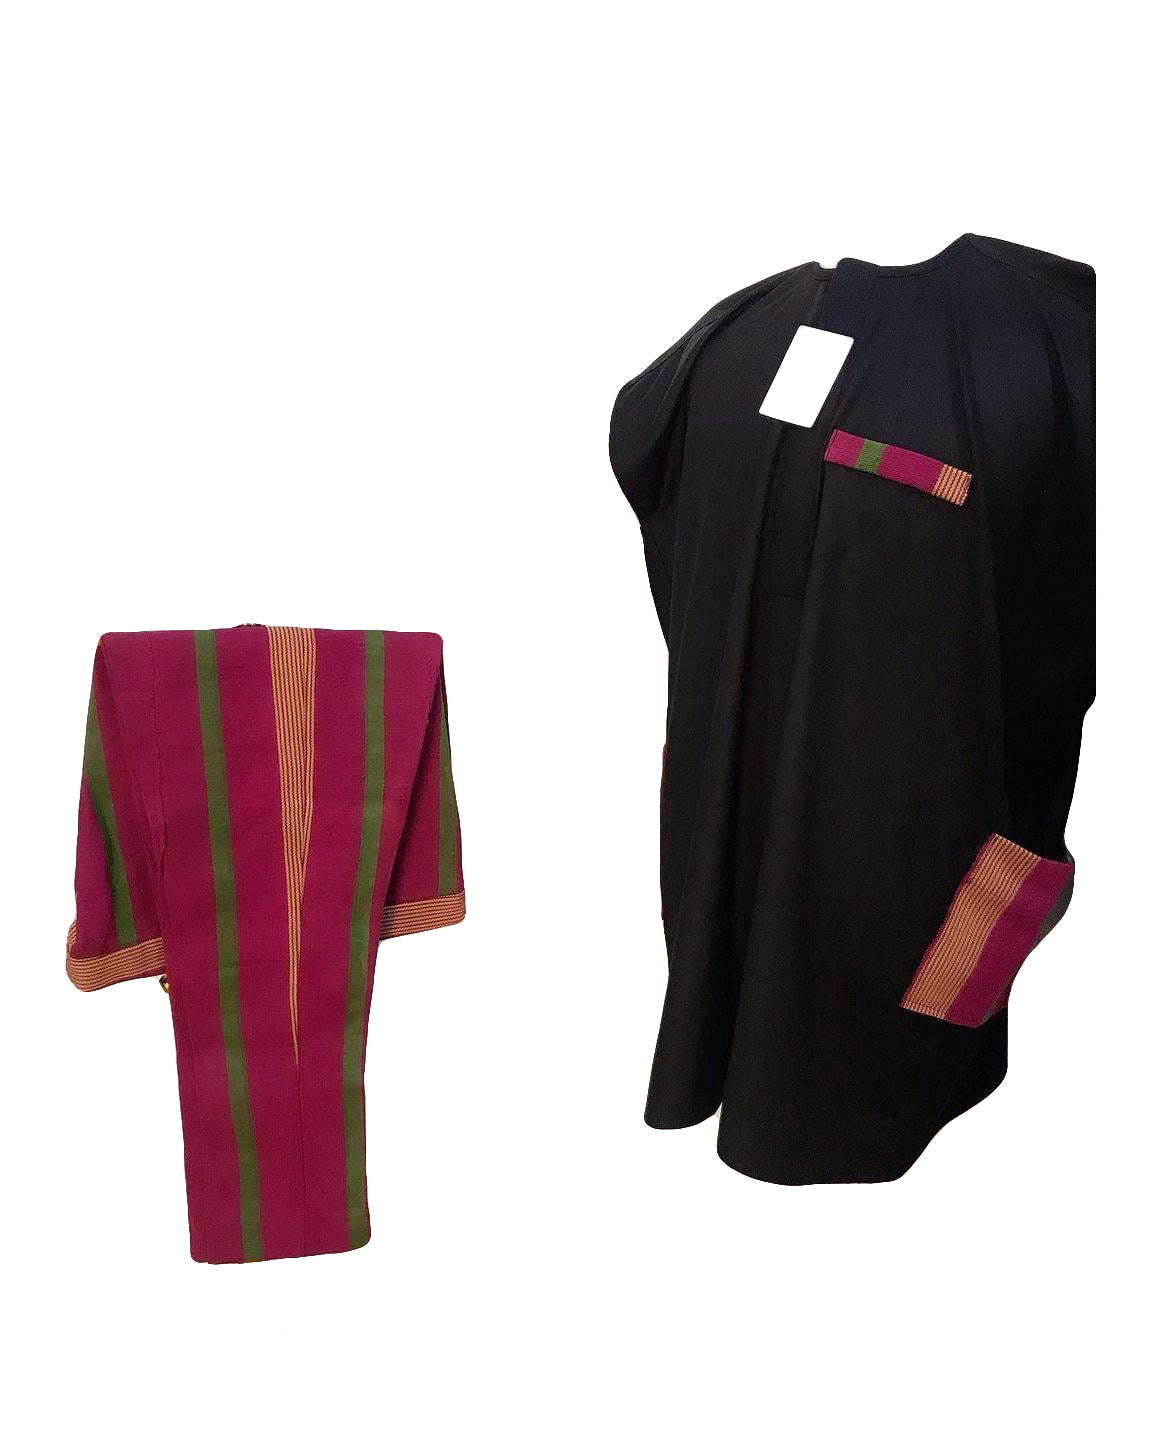 African Art Wear men Two Piece Set Short Sleeve Top Solid Black and Red Side Pocket shirt With Stripe Trouser